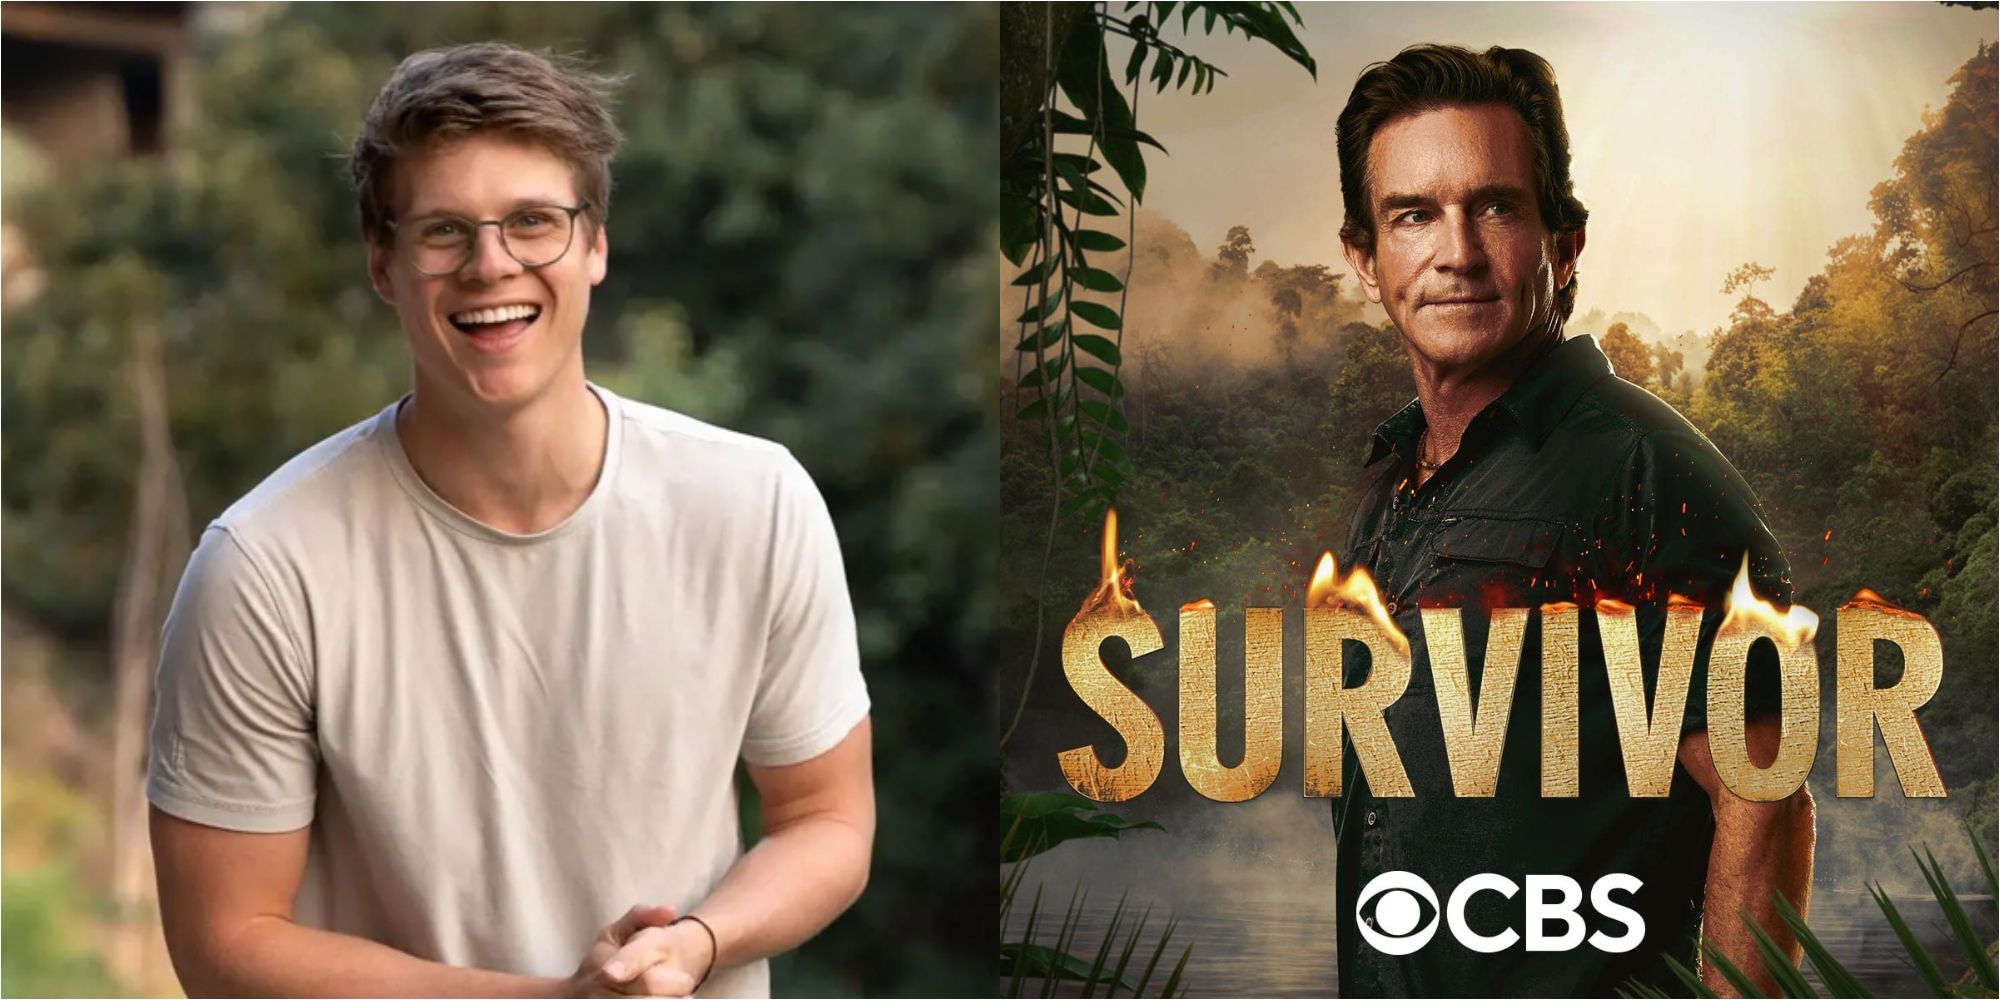 Split image showing Kyle from Big Brother 24 and the logo for Survivor.